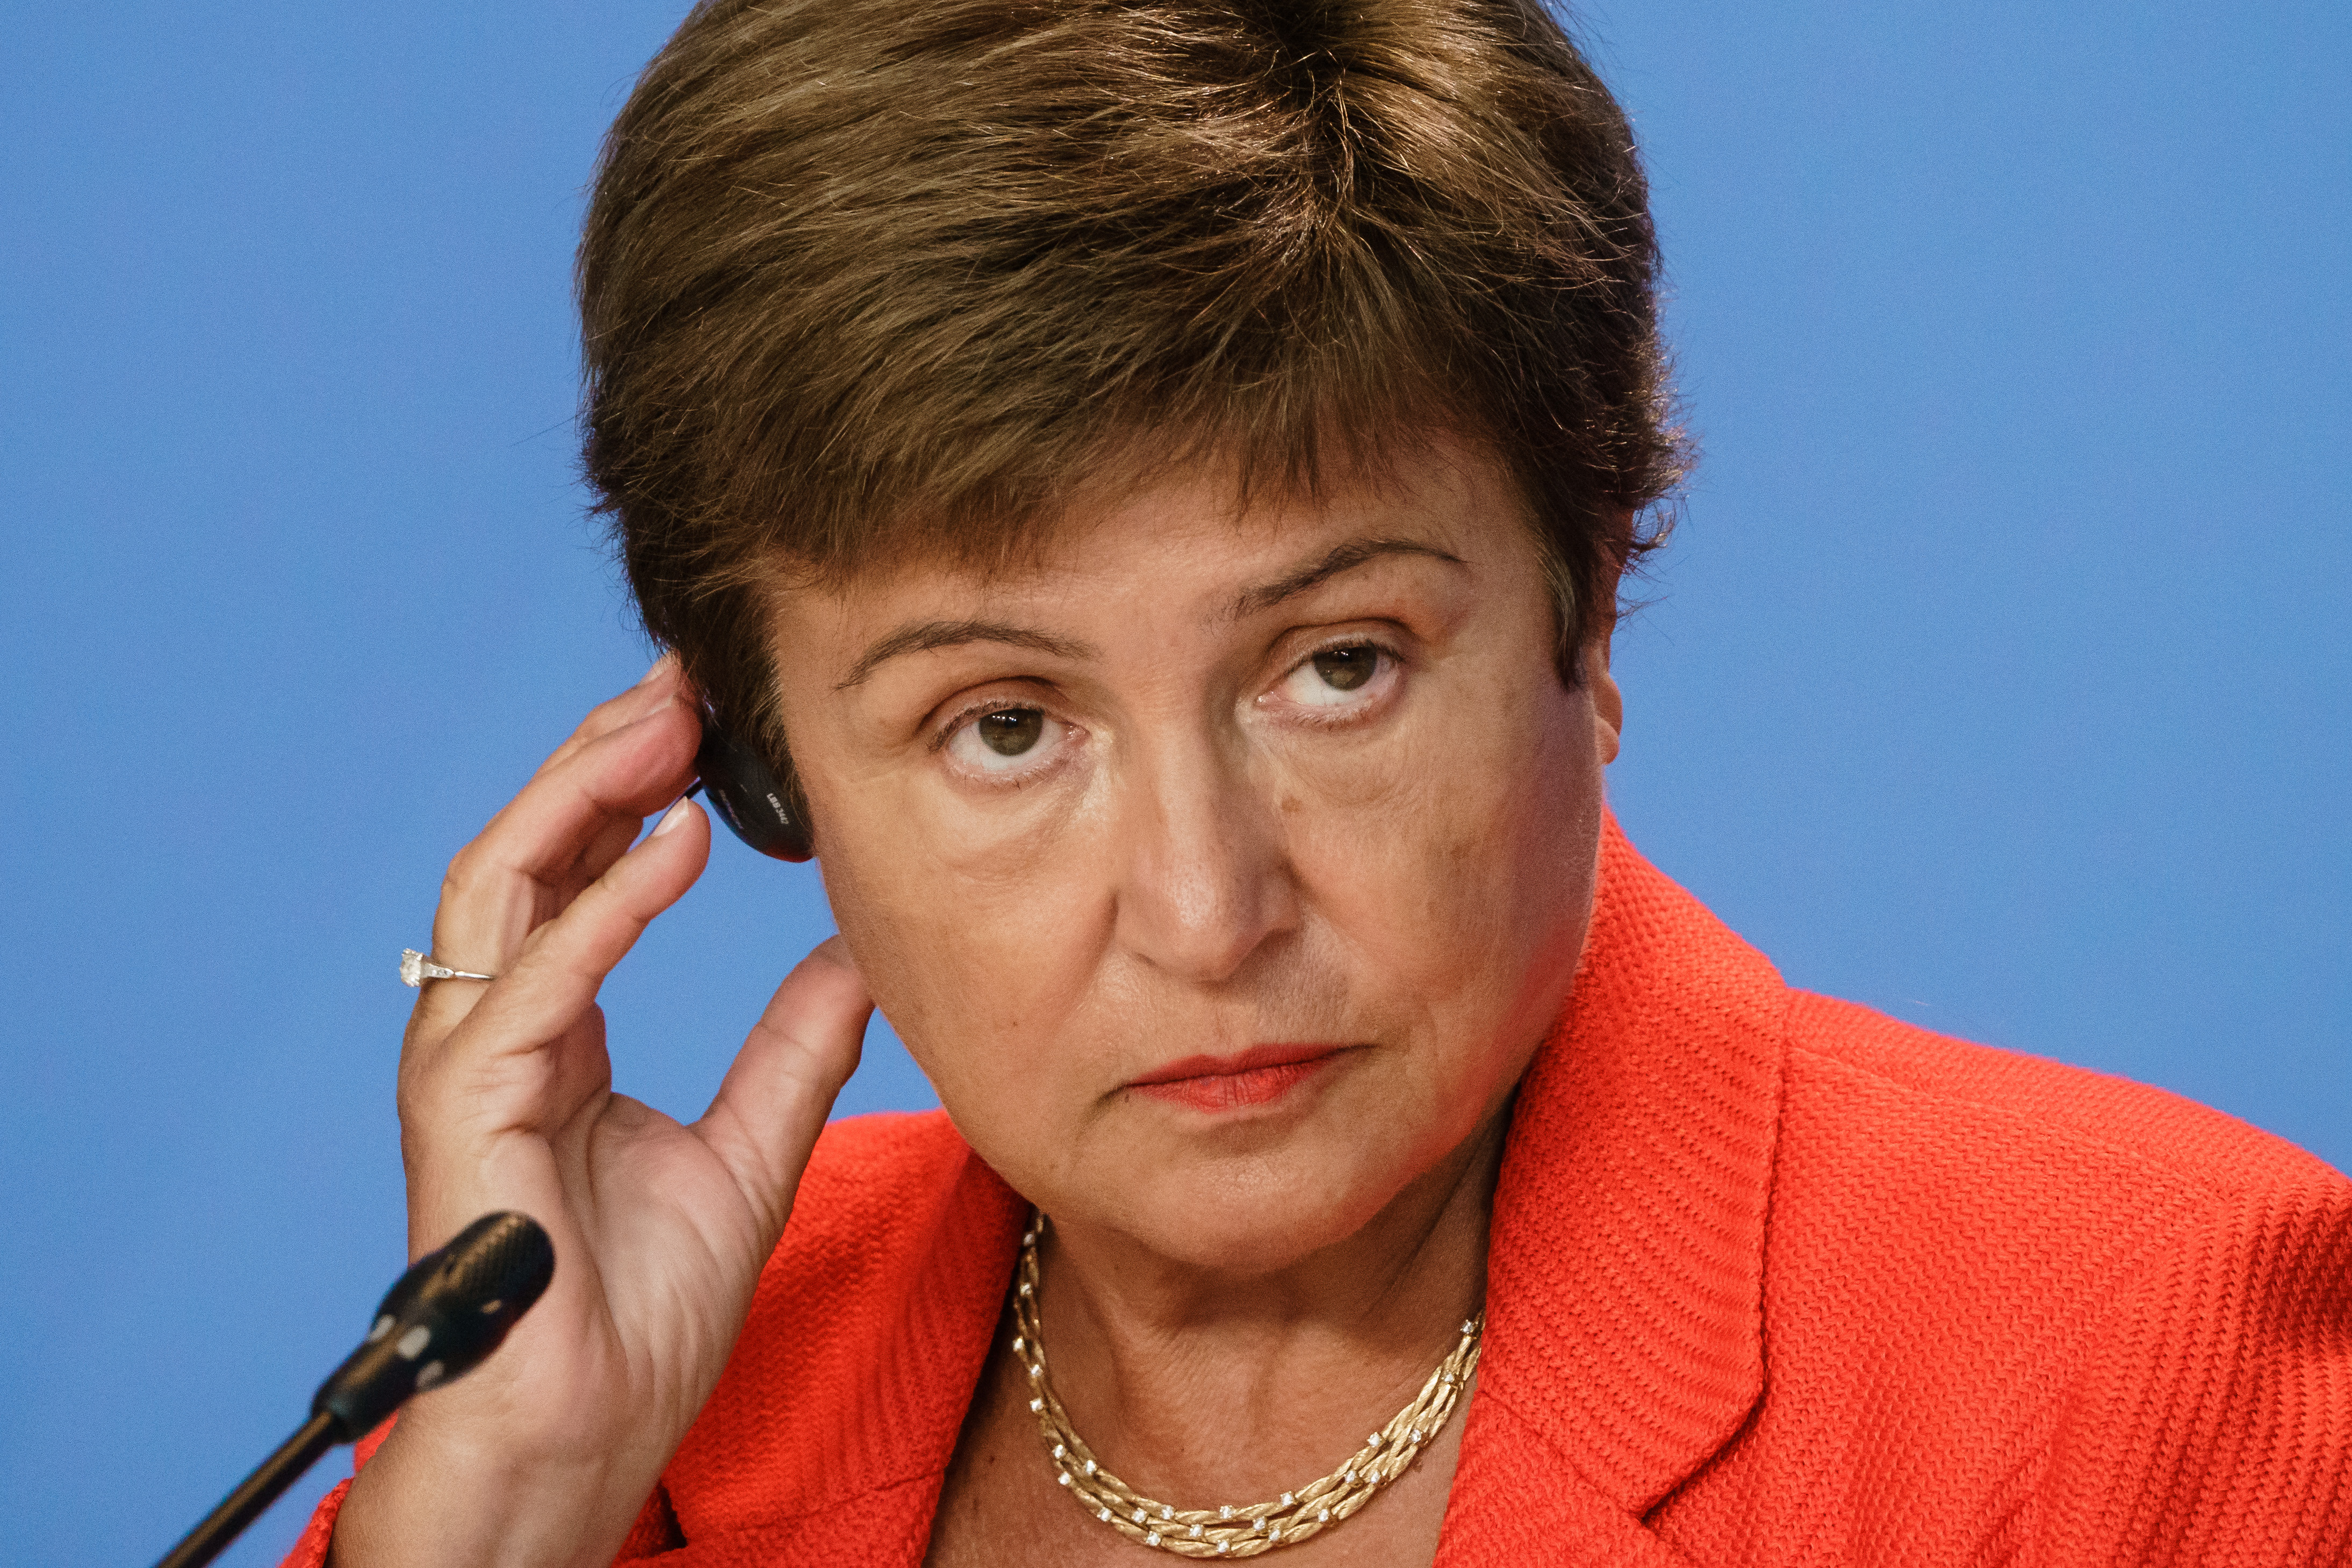 Managing Director of the International Monetary Fund (IMF) Kristalina Georgieva speaks during a press conference as the Chancellor meets with economic and financial organizations in Berlin at the German chancellery on August 26, 2021 in Berlin, Germany. (Clemens Bilan— Pool/Getty Images)